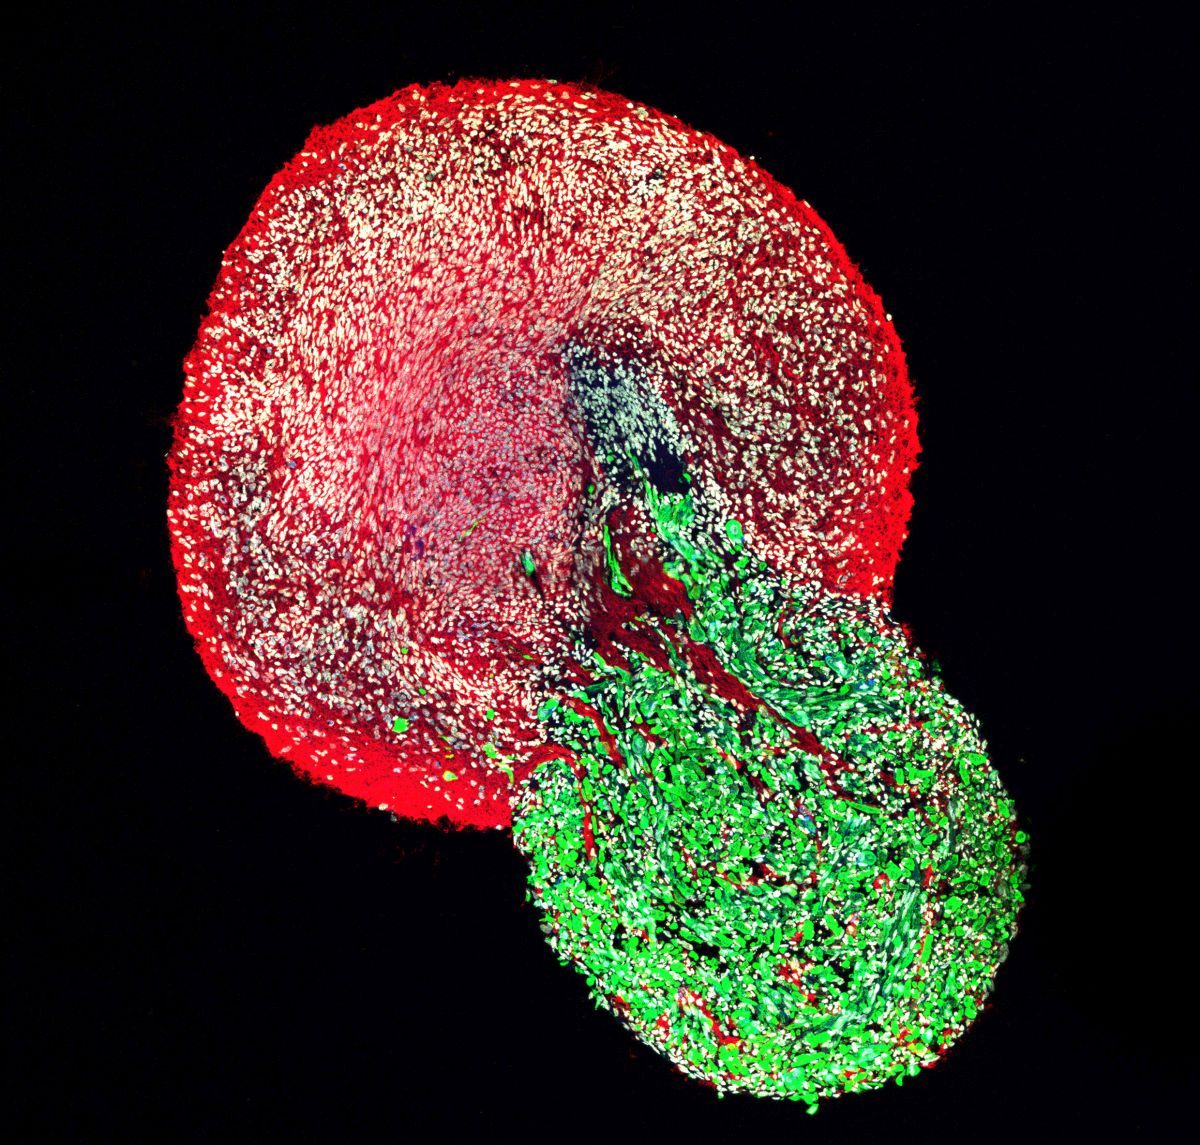 A section through a whole human neuromuscular organoid where spinal cord neurons (red) innervate the skeletal muscle cells (green). All cell nuclei are stained in white colour. © Jorge Miguel Faustino Martins, Gouti Lab, MDC